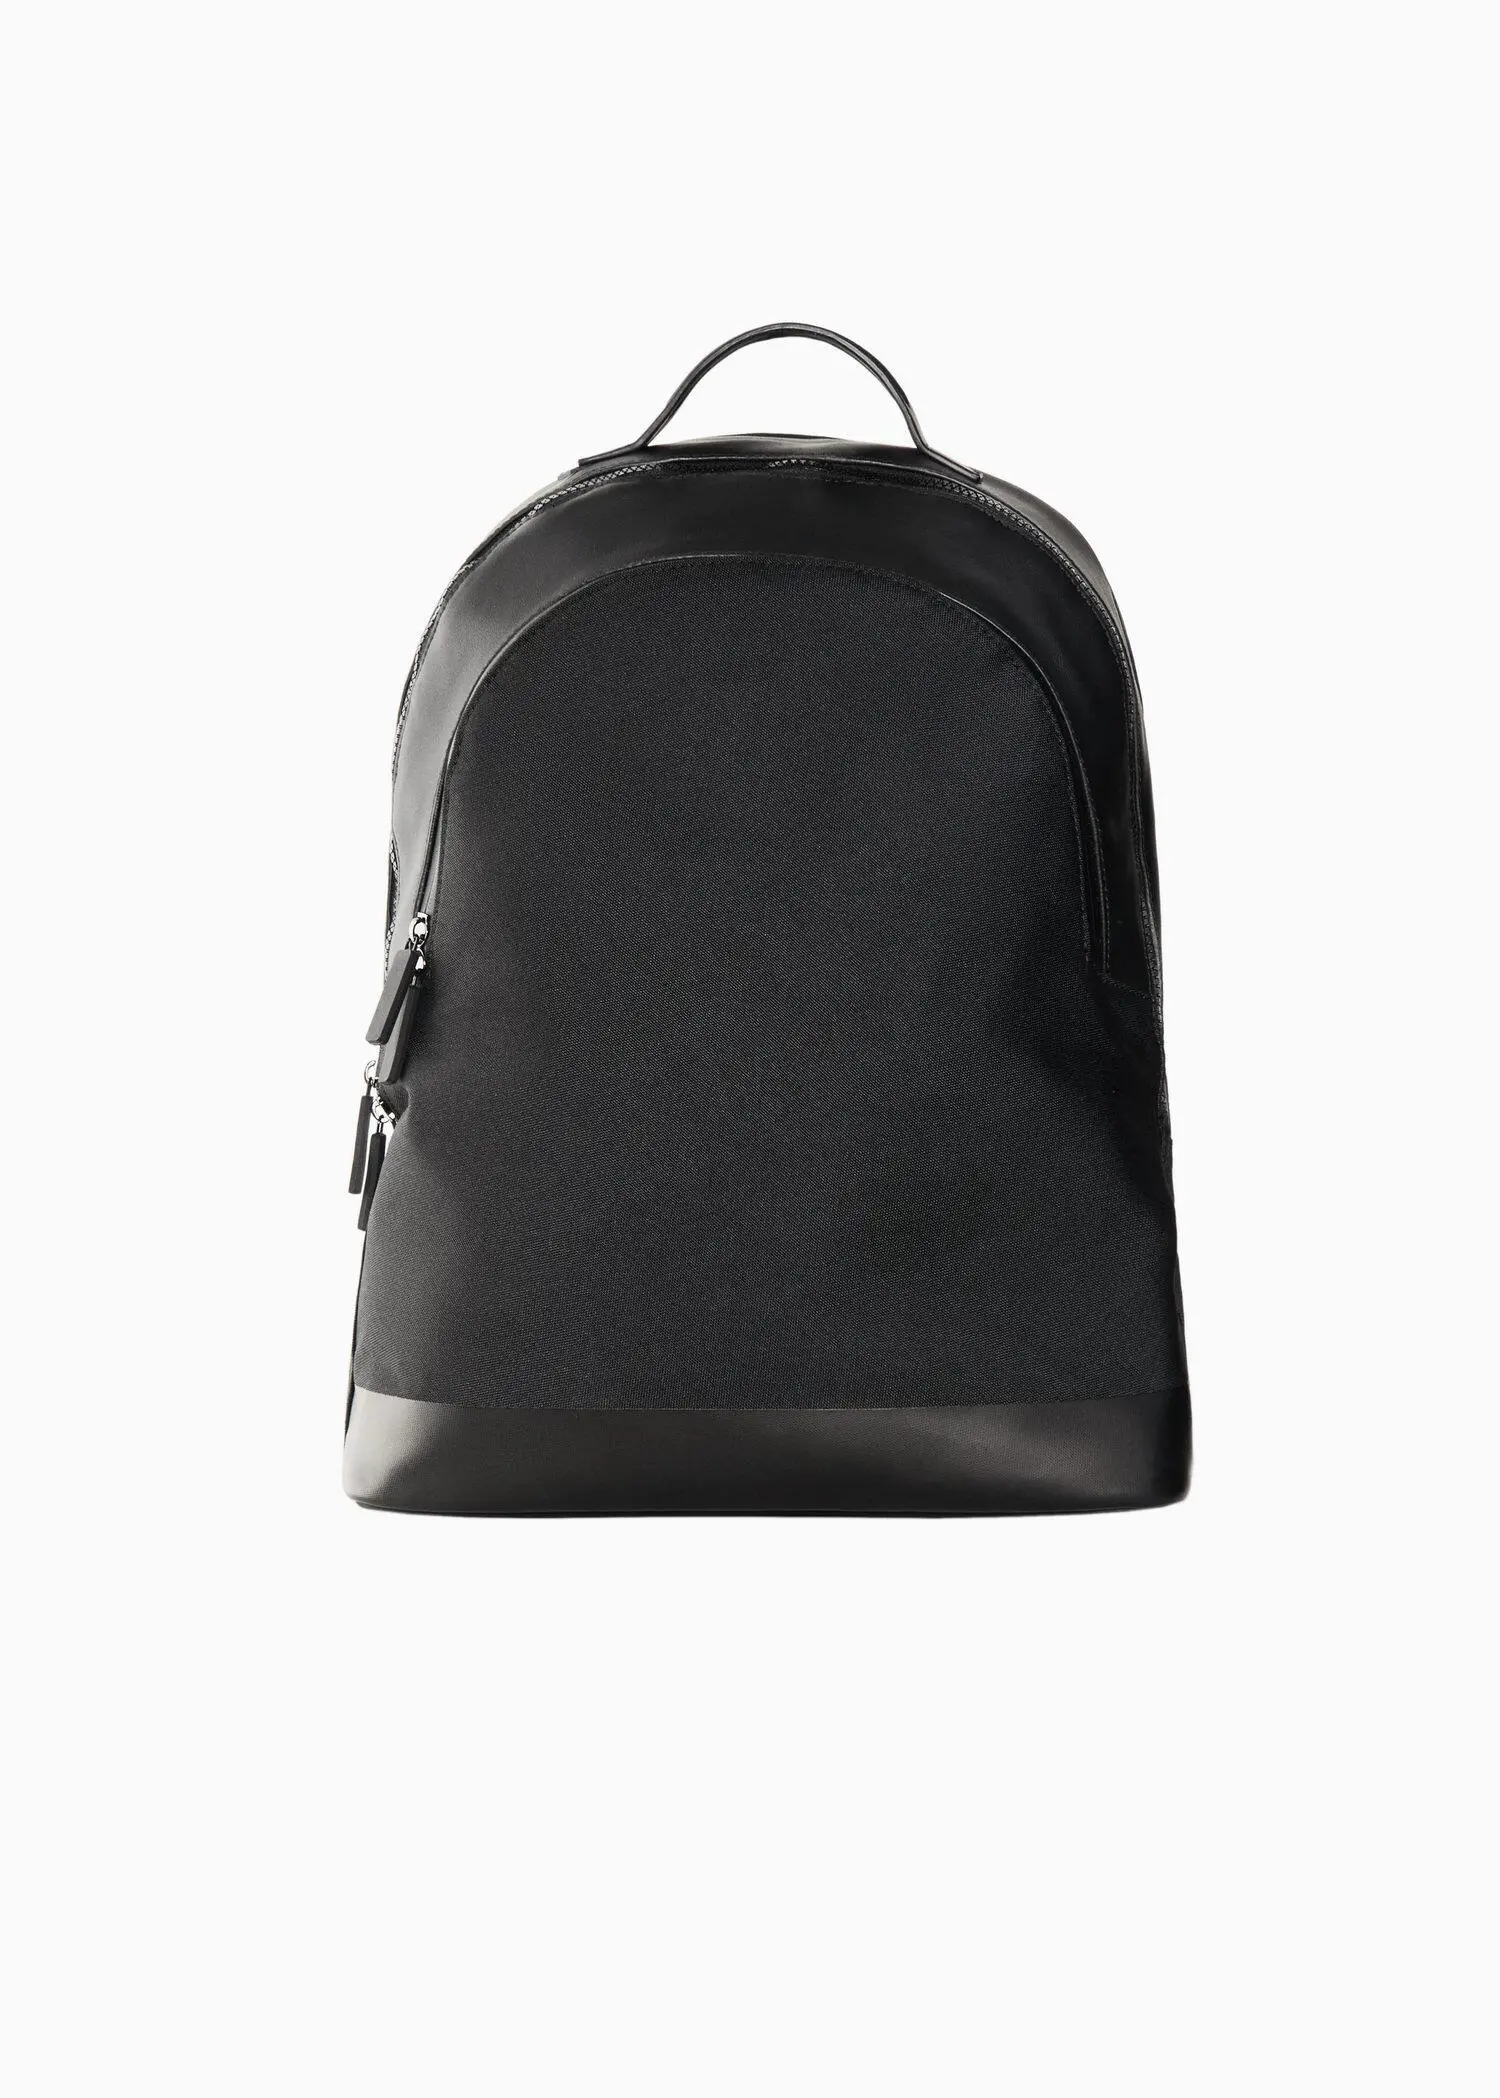 Mango Water-repellent leather-effect backpack. 1